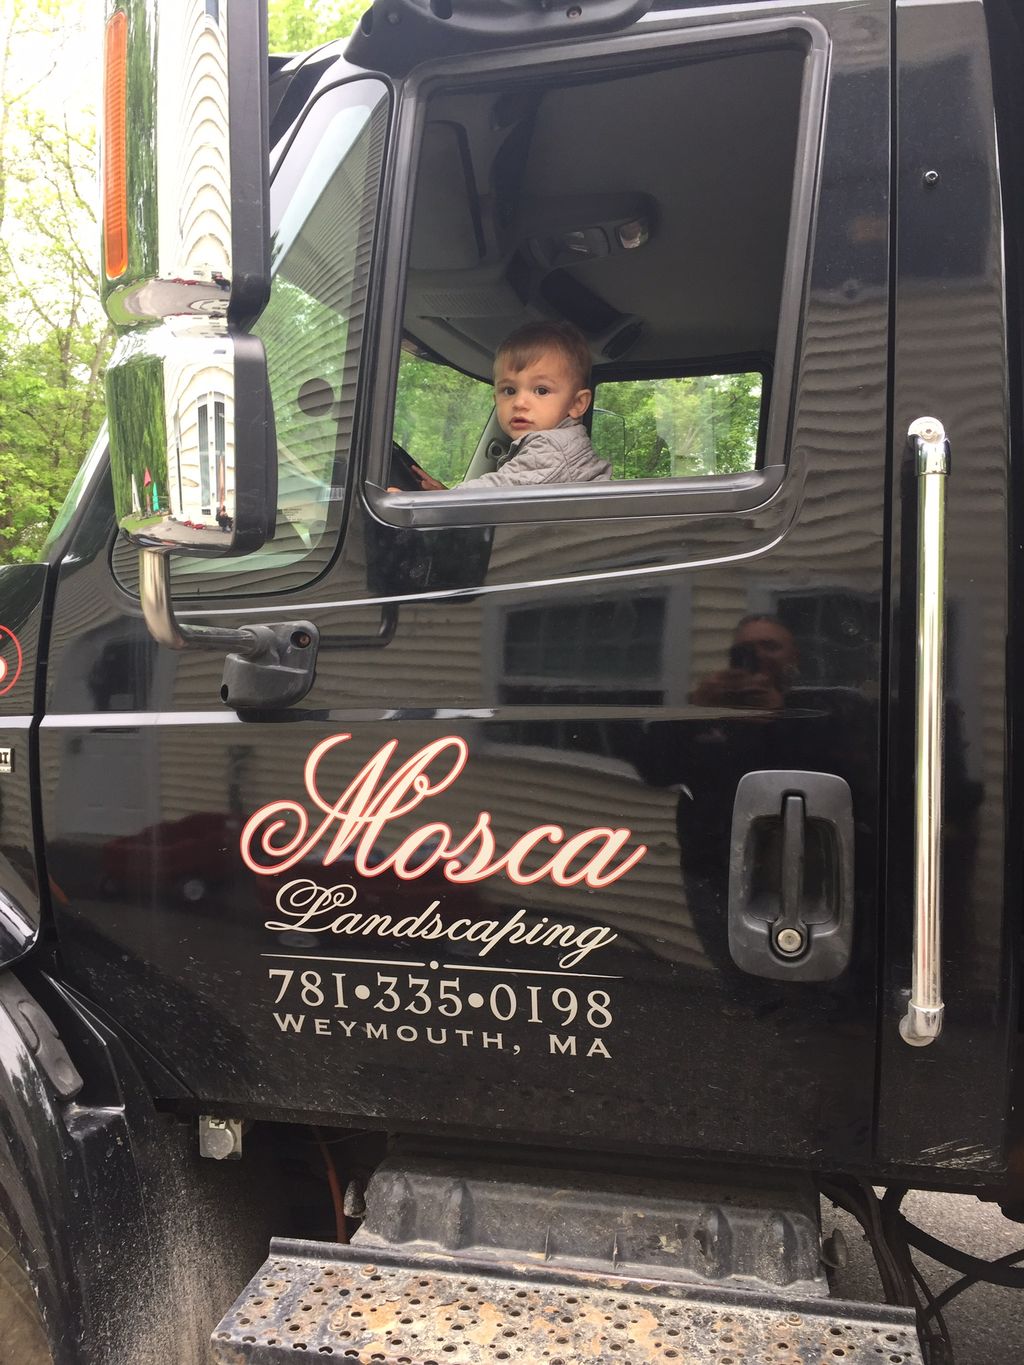 Mosca Landscaping Inc